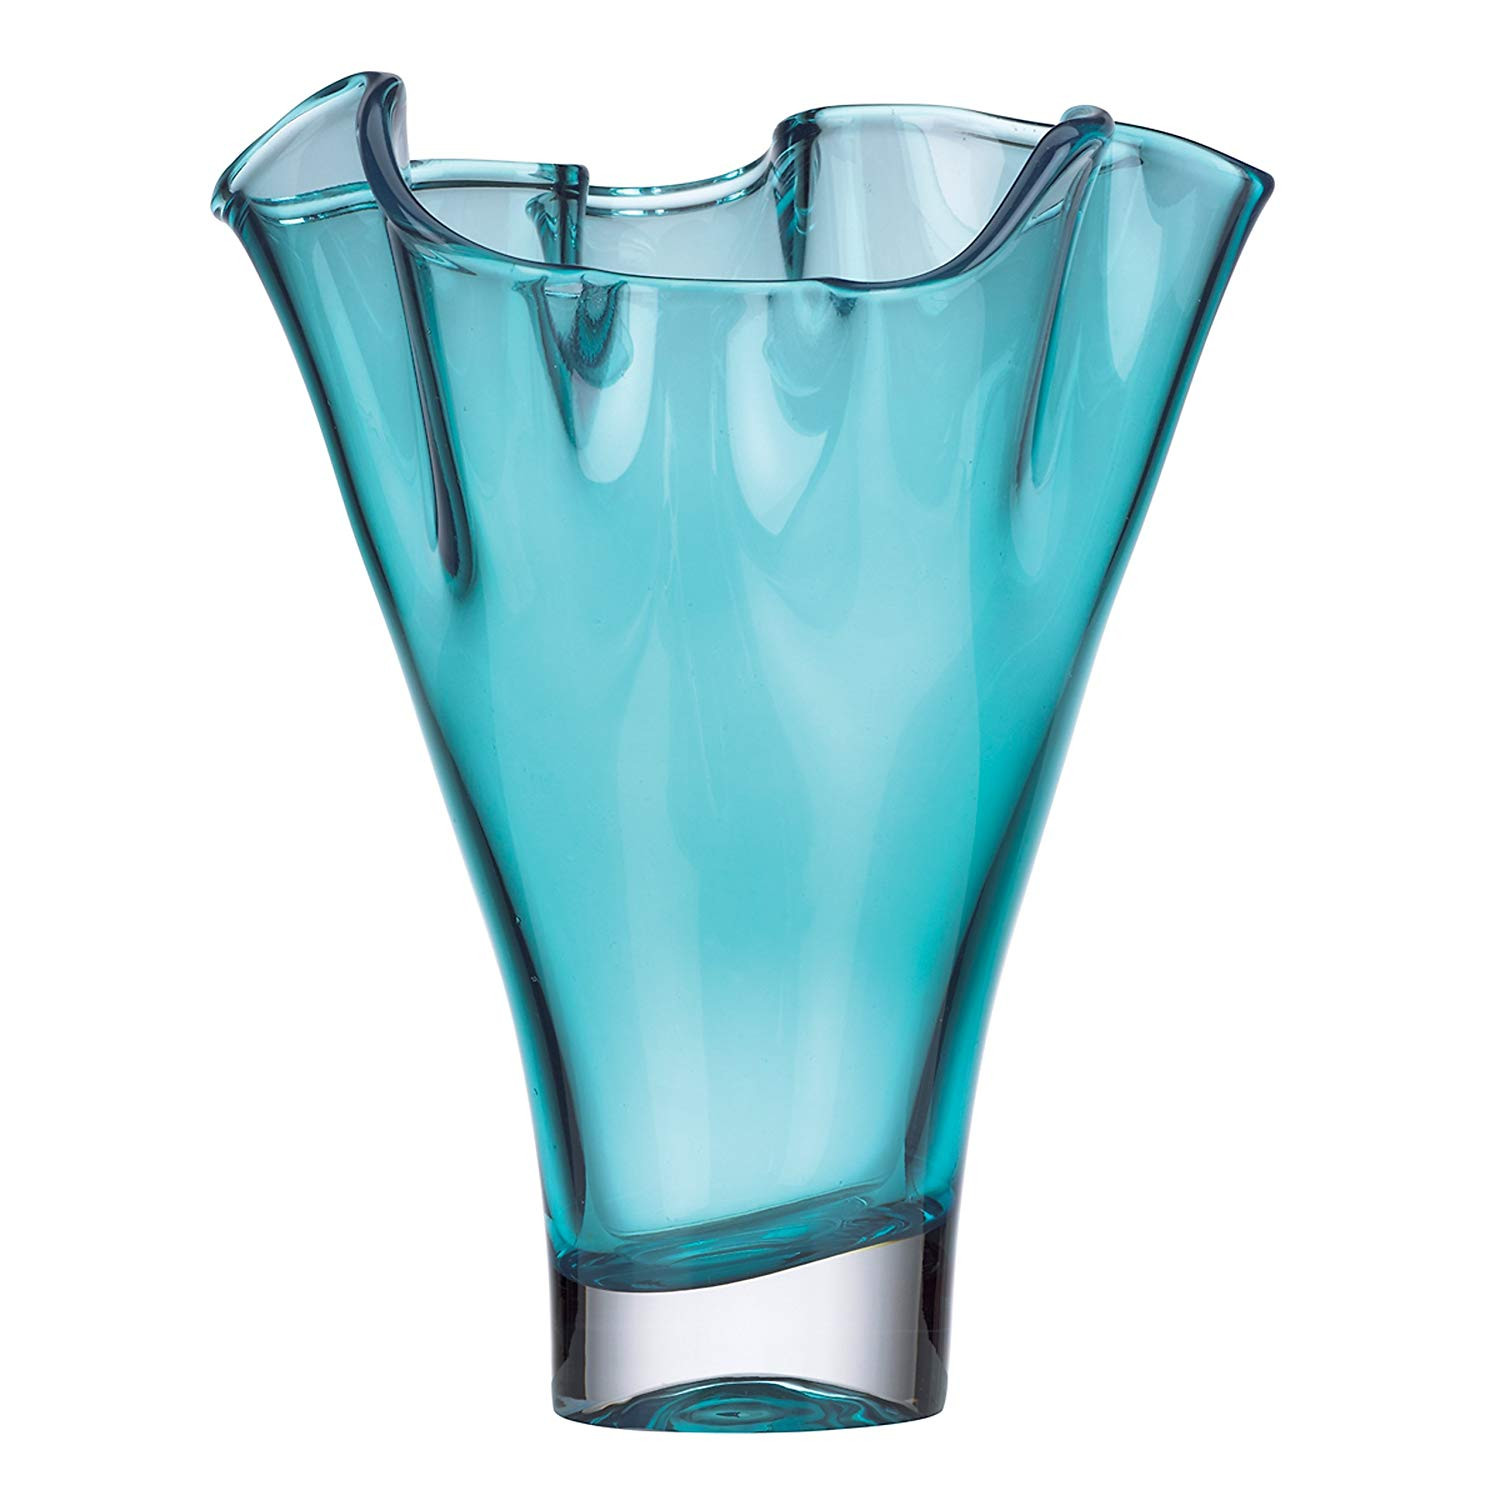 10 Lovable Lenox Bud Vases Set Of 3 2024 free download lenox bud vases set of 3 of amazon com lenox organics ruffle crystal vase turquoise home for amazon com lenox organics ruffle crystal vase turquoise home kitchen